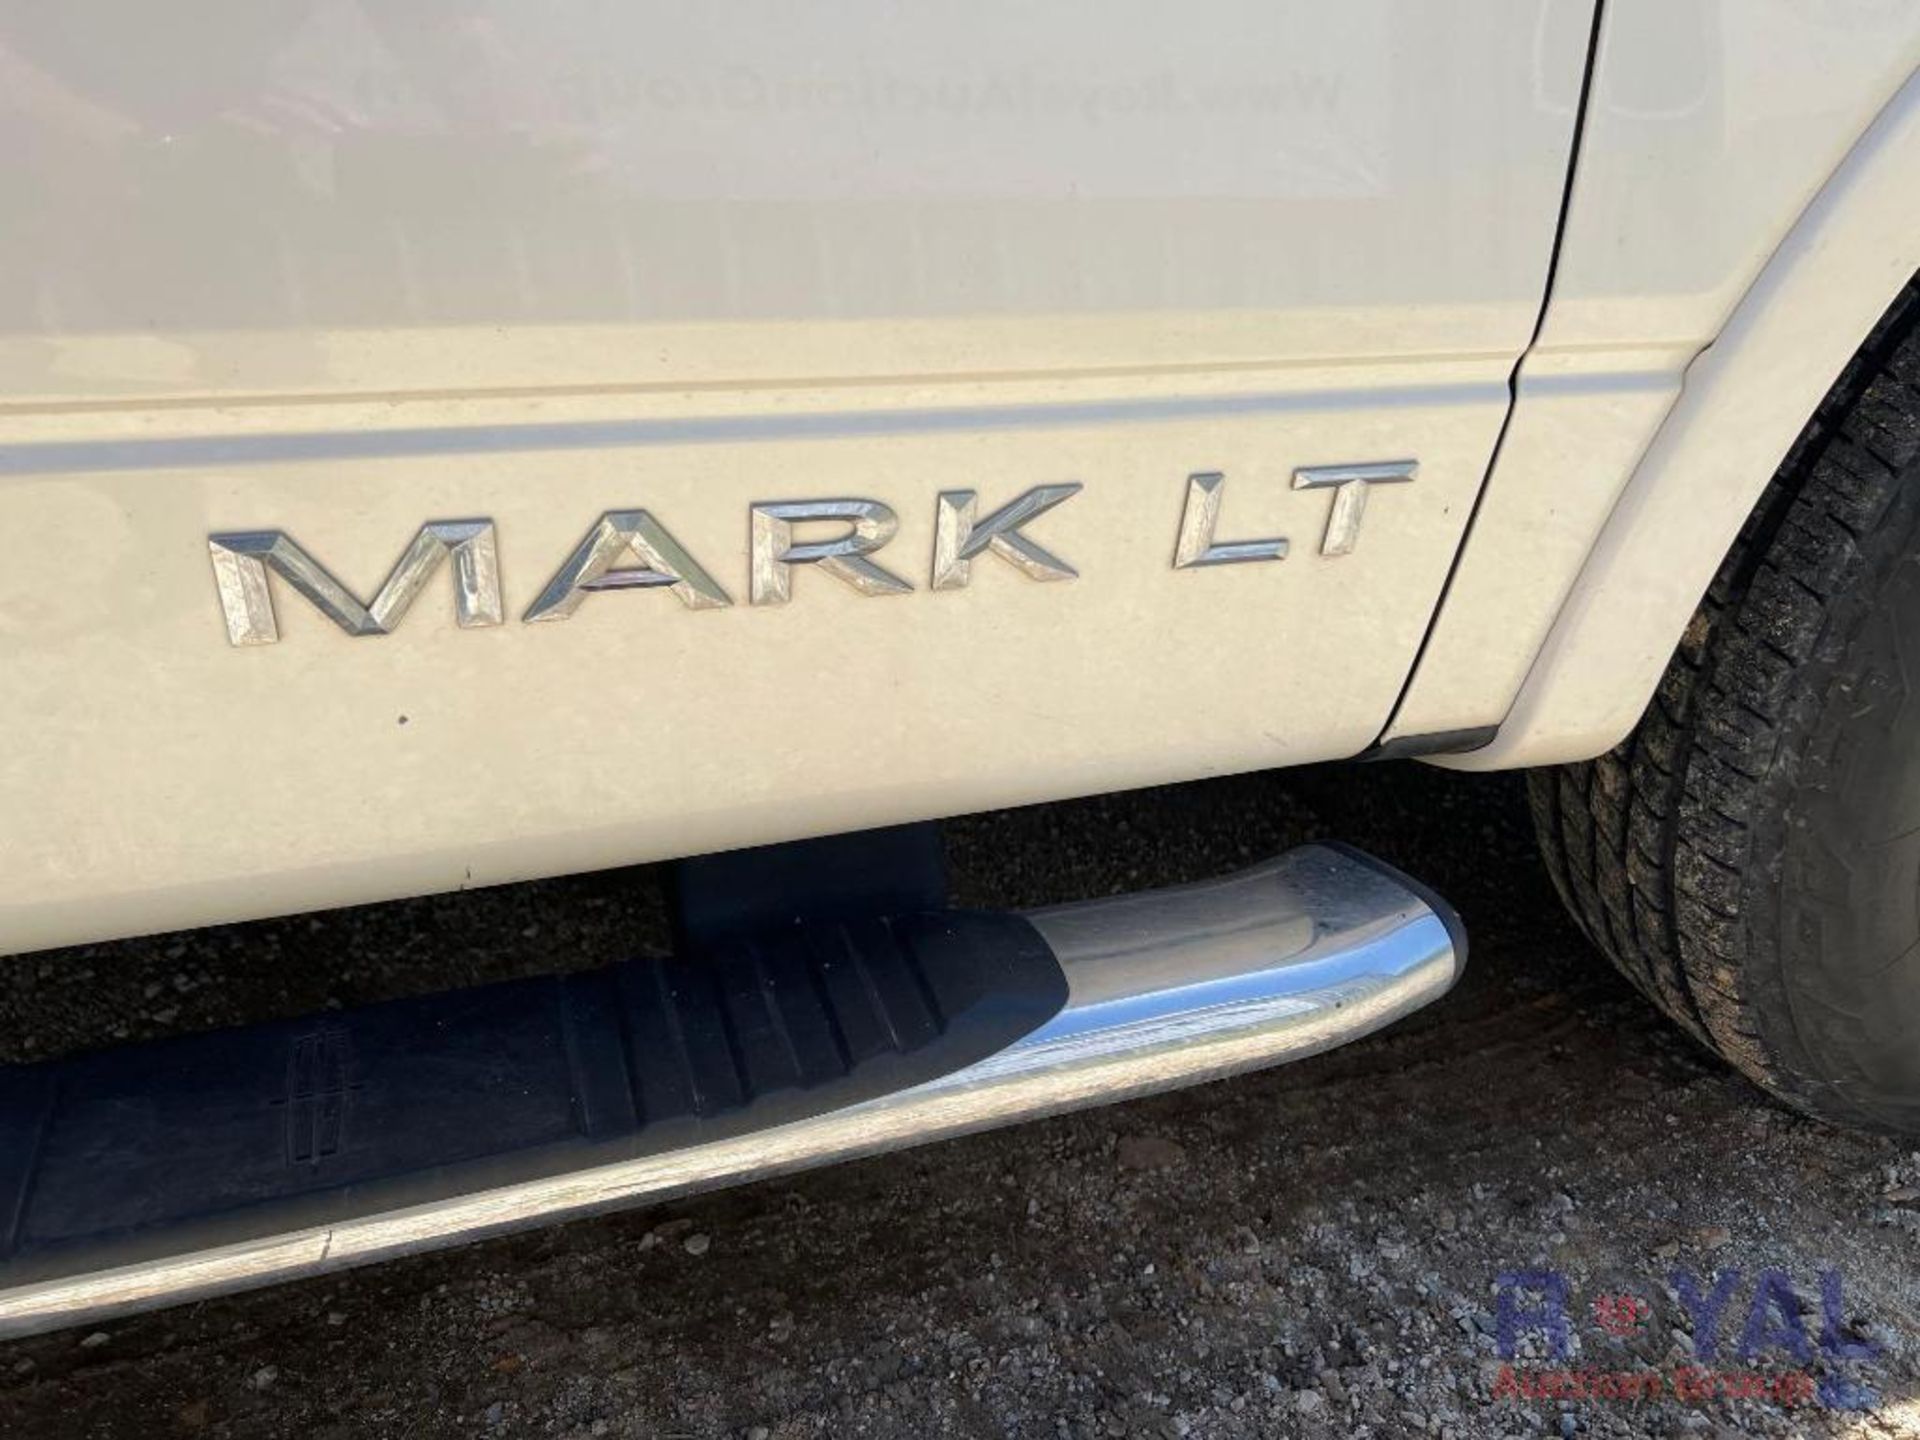 2015 Lincoln Mark LT Crew Cab Pickup Truck - Image 52 of 75